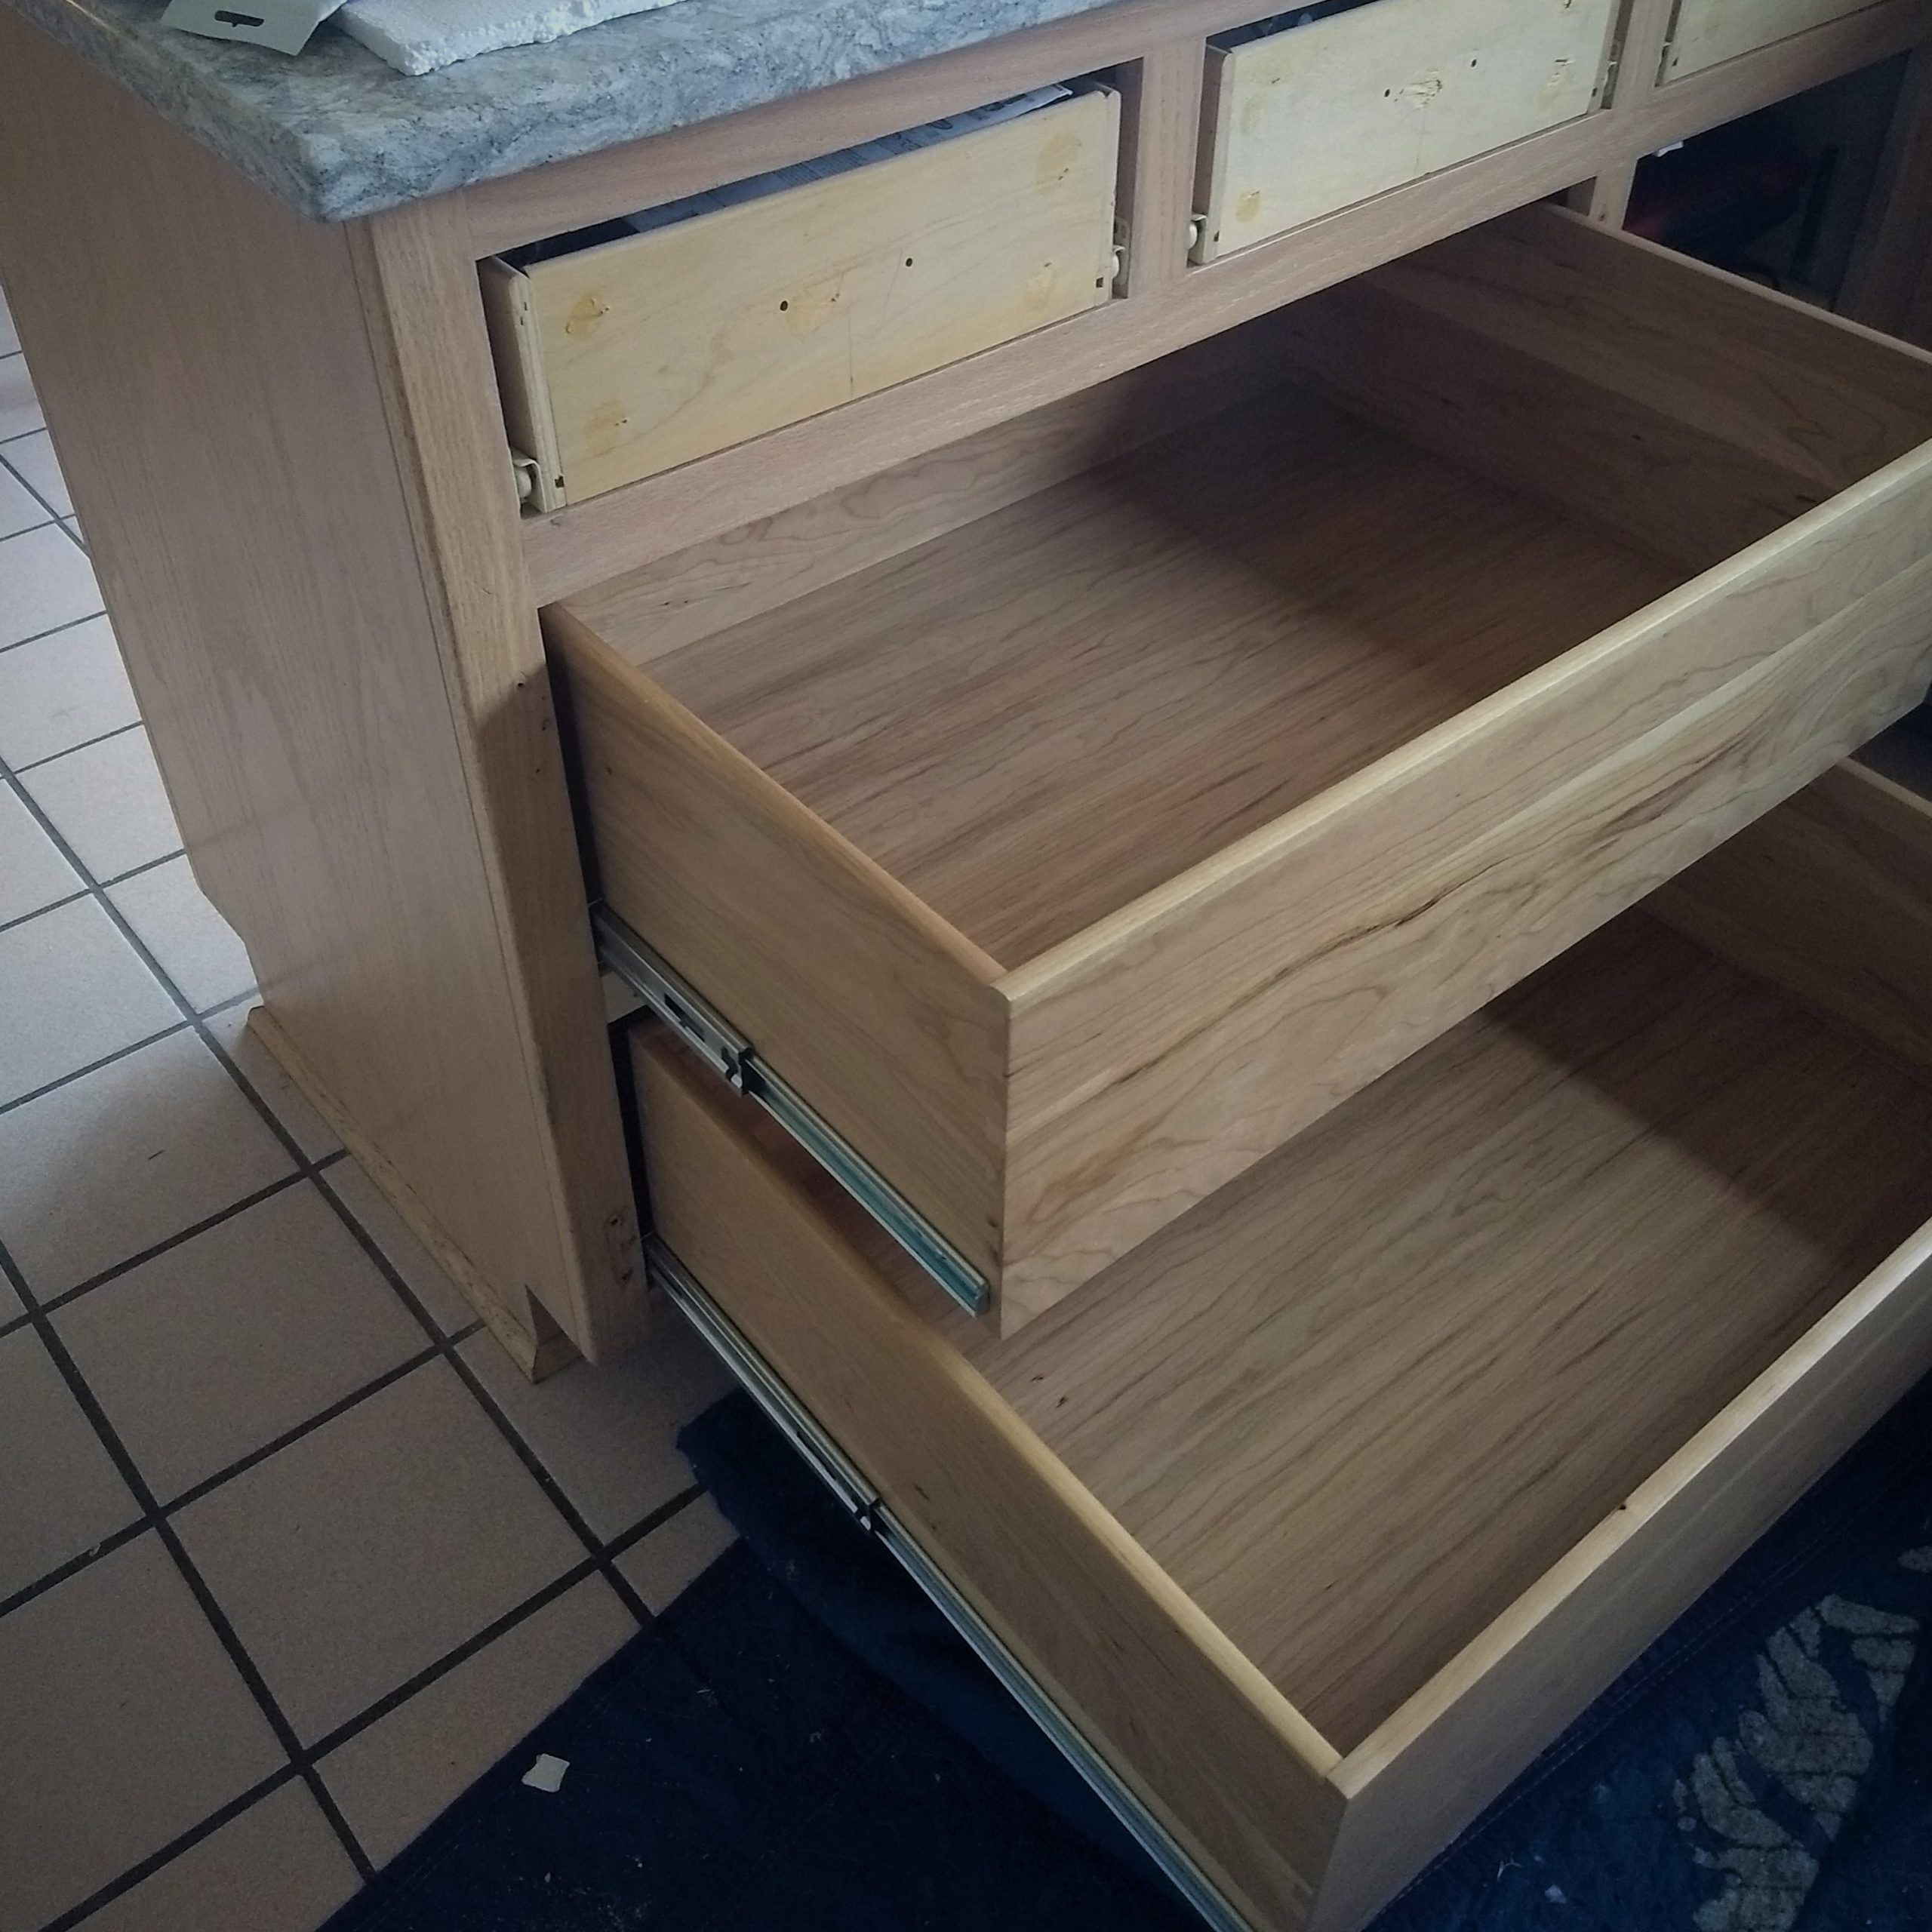 Converting Lower Cabinets To Drawers – Kitchen Craftsman – Geneva, Illinois Within Wood Cabinet With Drawers (View 20 of 20)